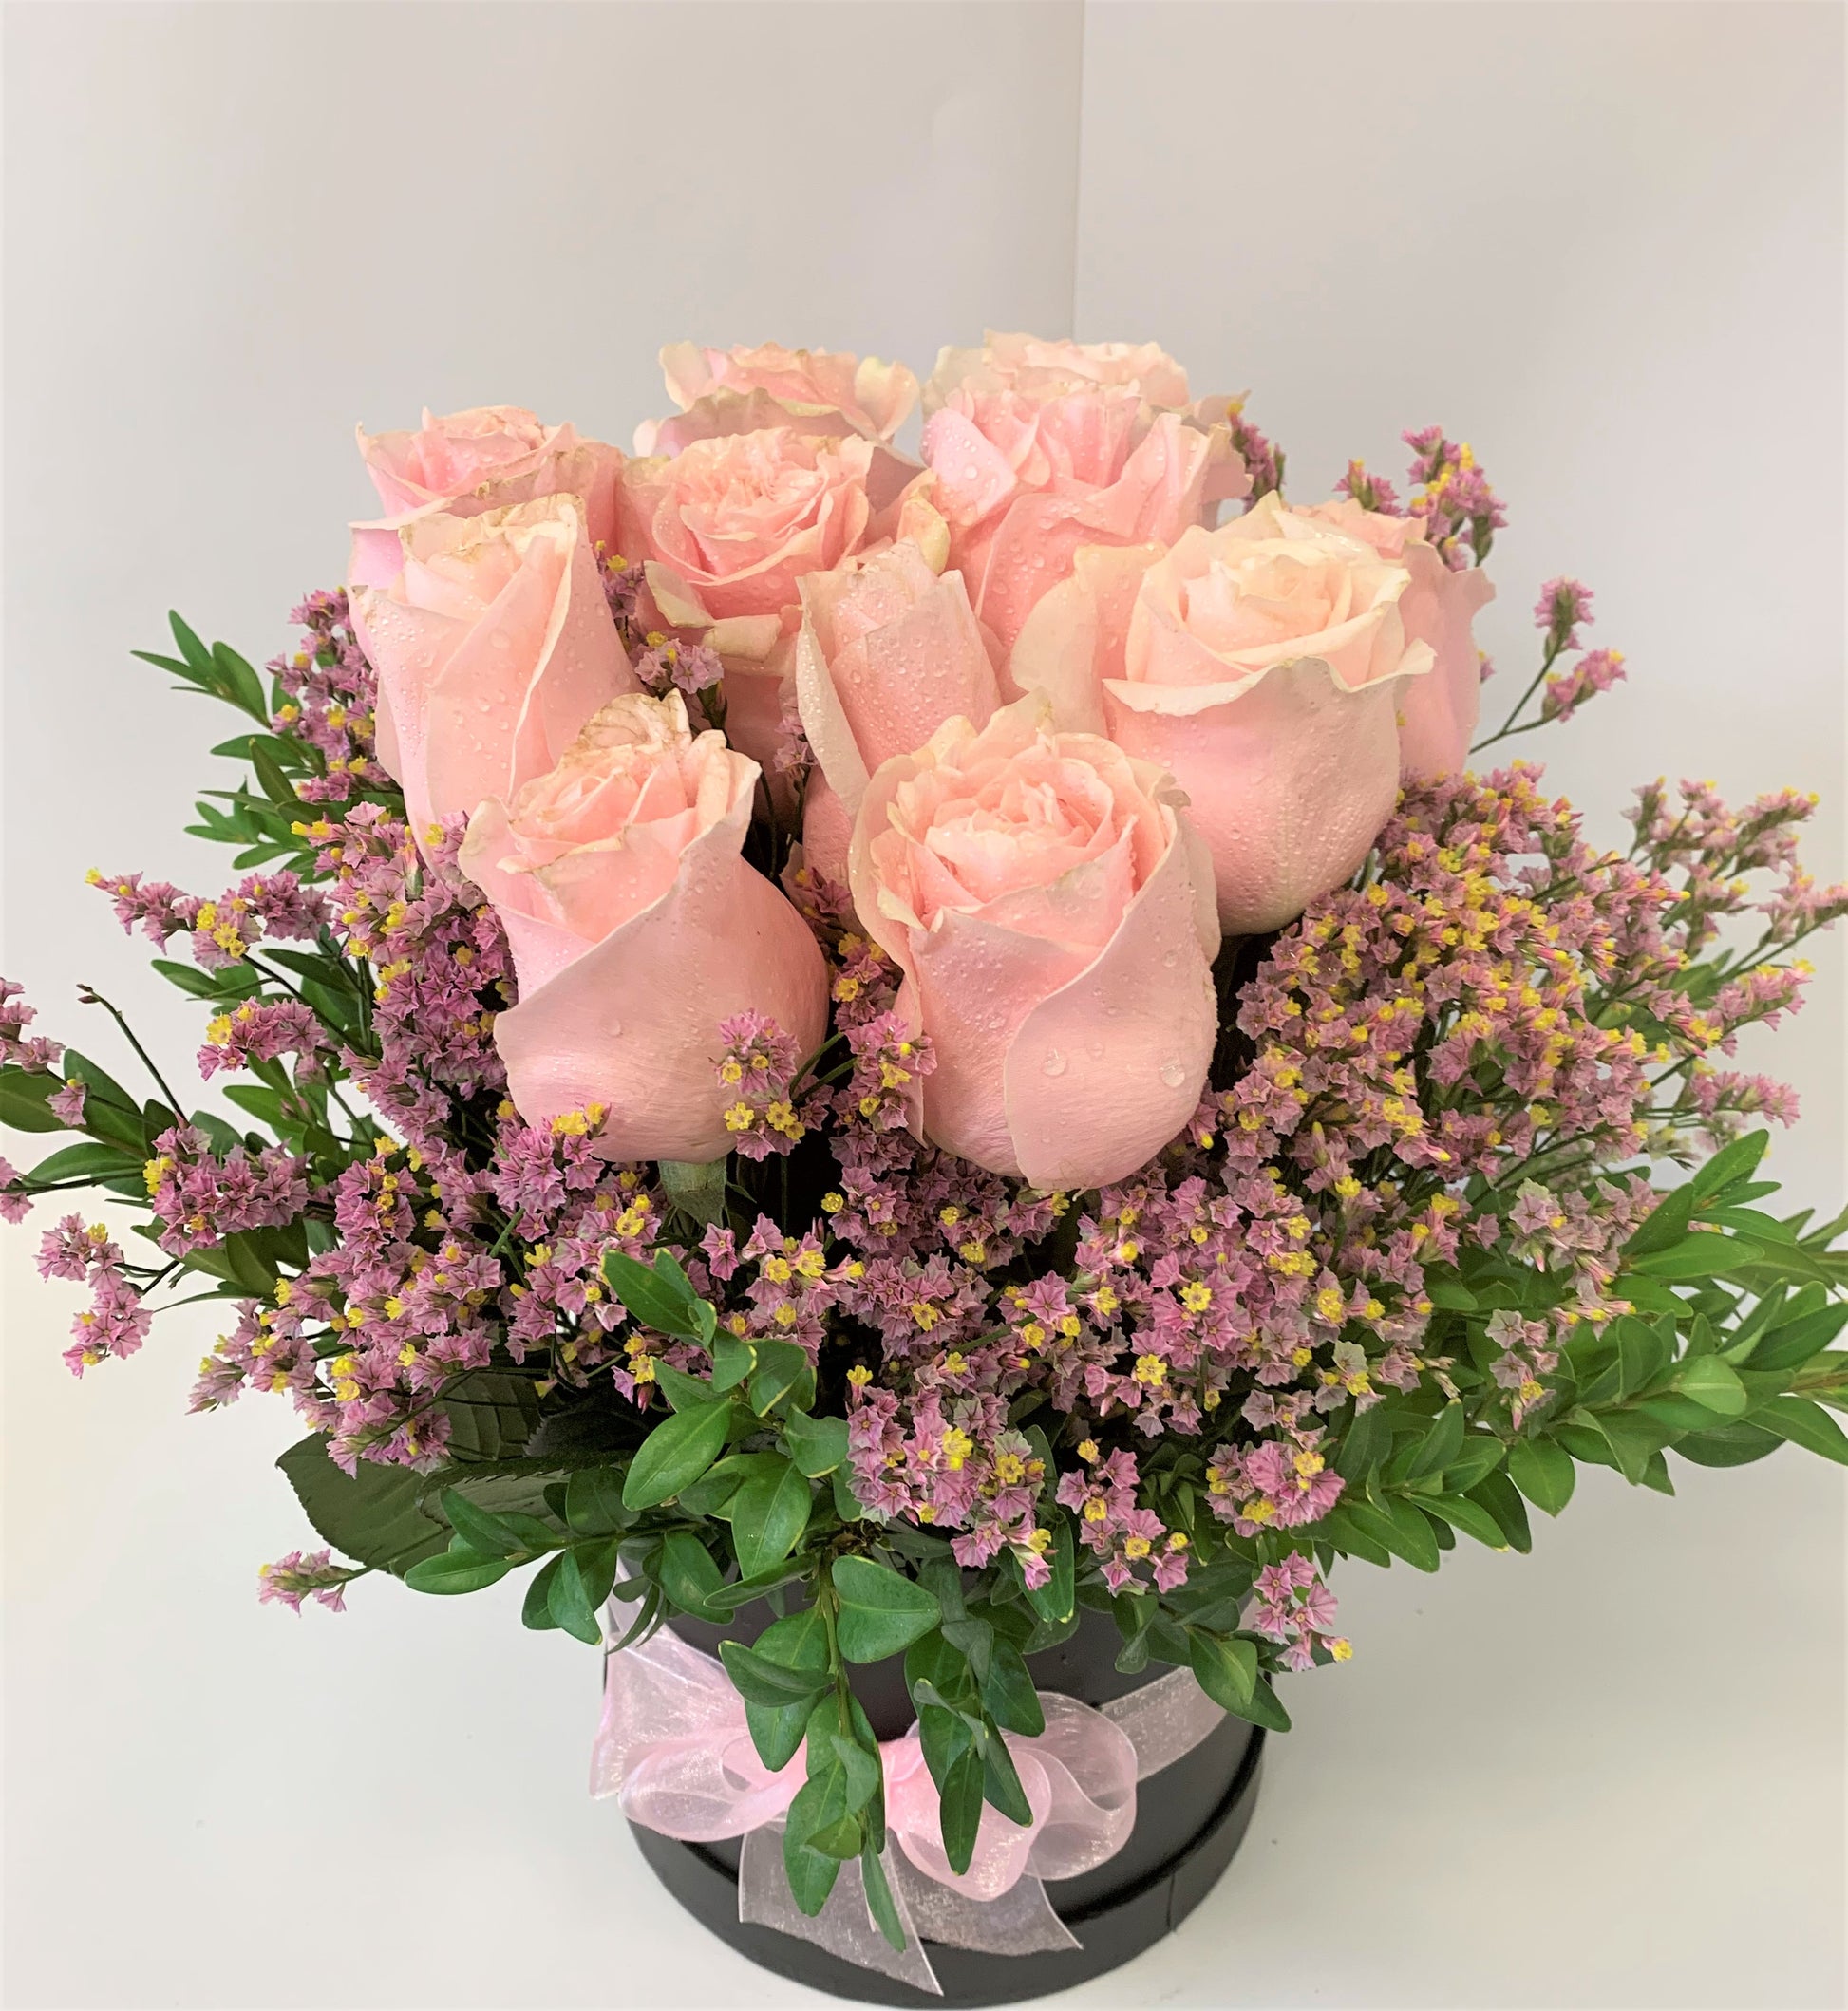 12 Beautiful pink roses in water in a decorative box for your special friend or lover for Valentines day.      Delivery in Hamilton or Throughout New Zealand. 